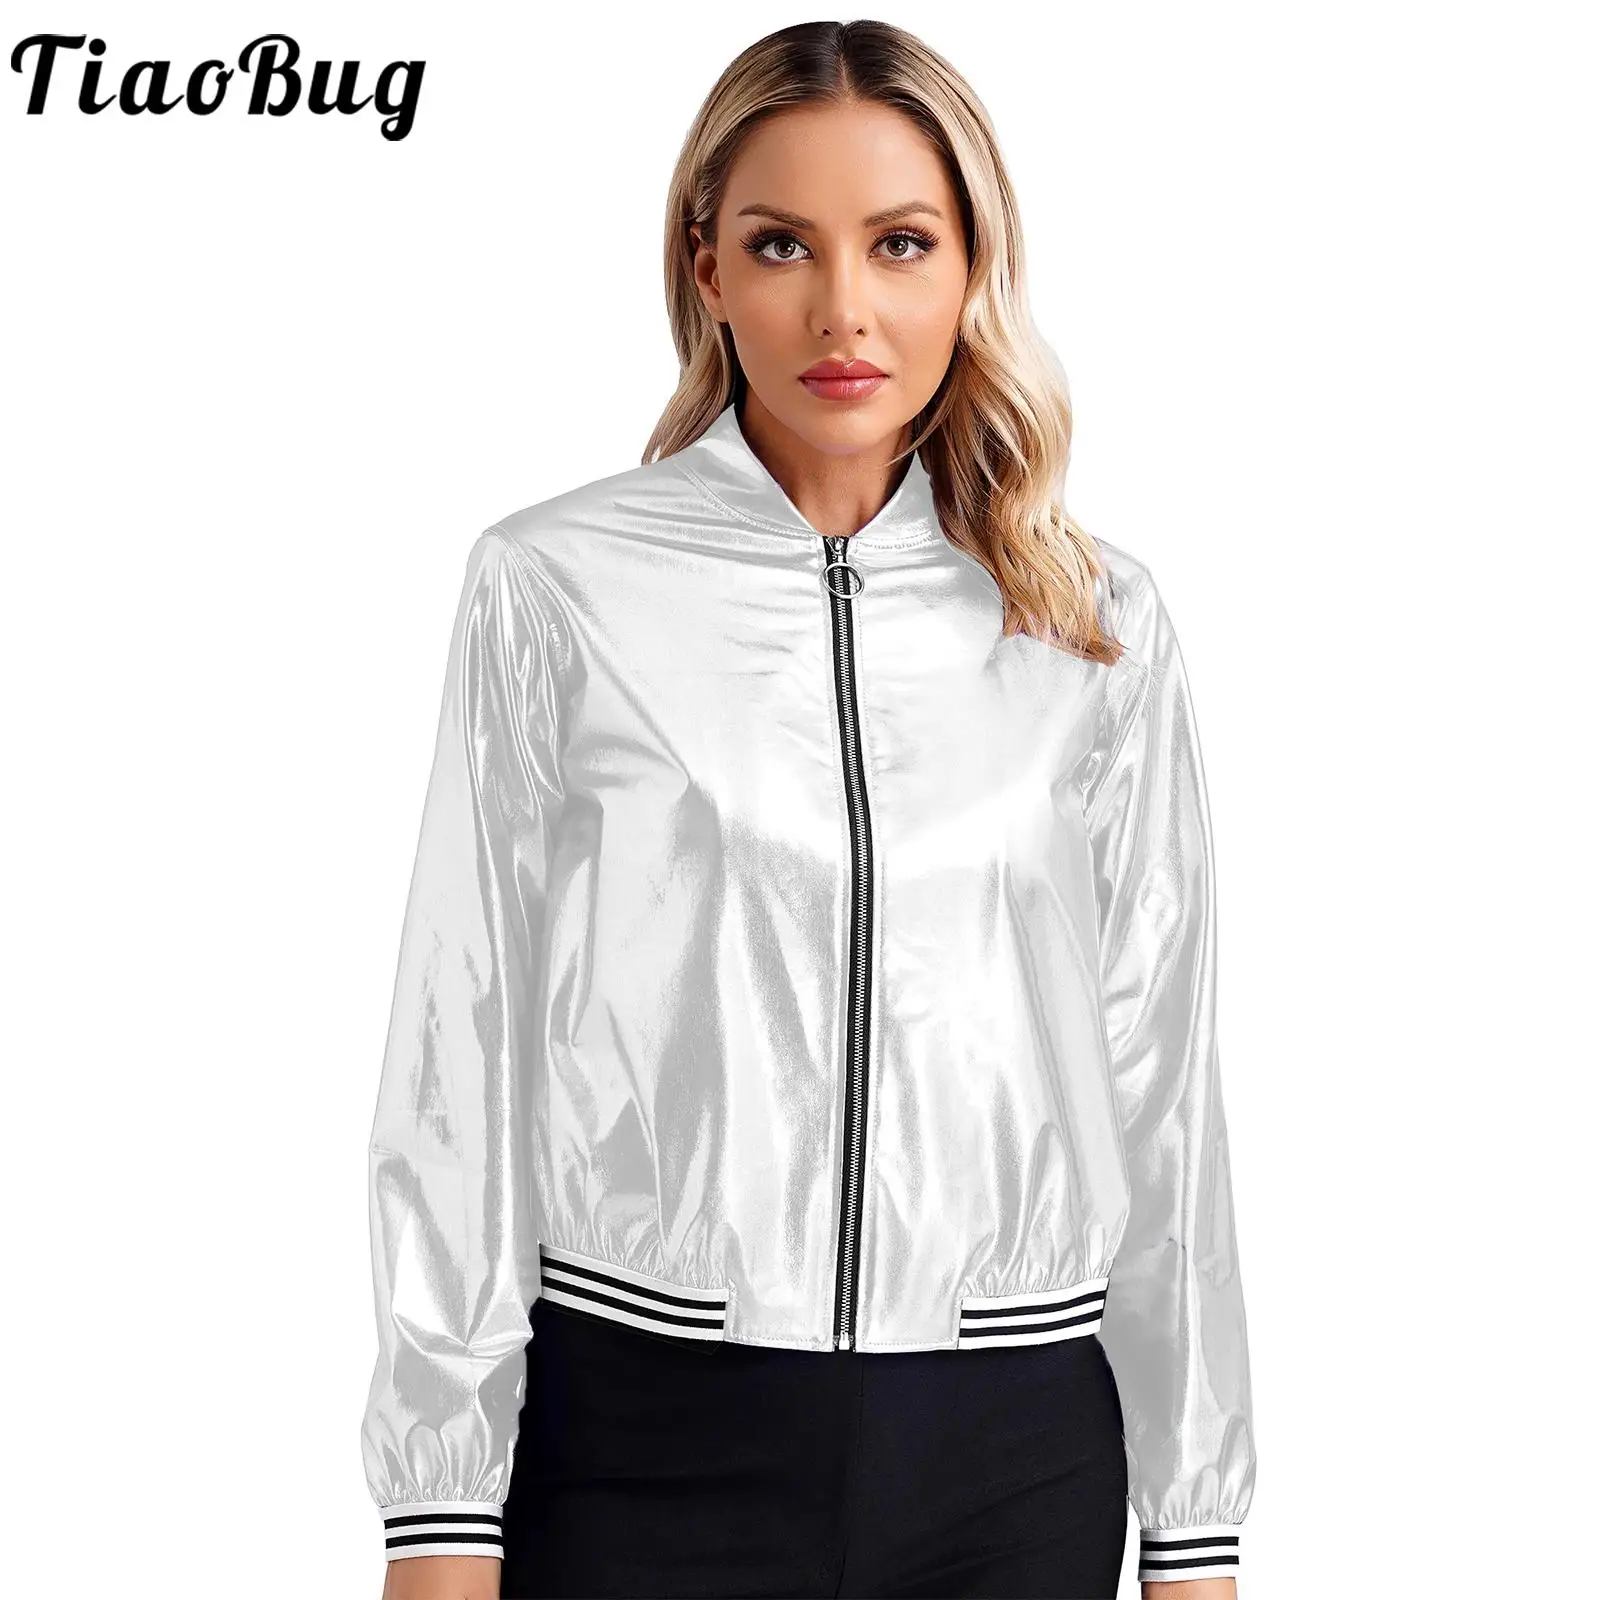 

Women's Holographic Costumes Metallic Shiny Silver Bomber Jacket Long Sleeve Front Zipper Coat Carnival Rave Festival Outerwear